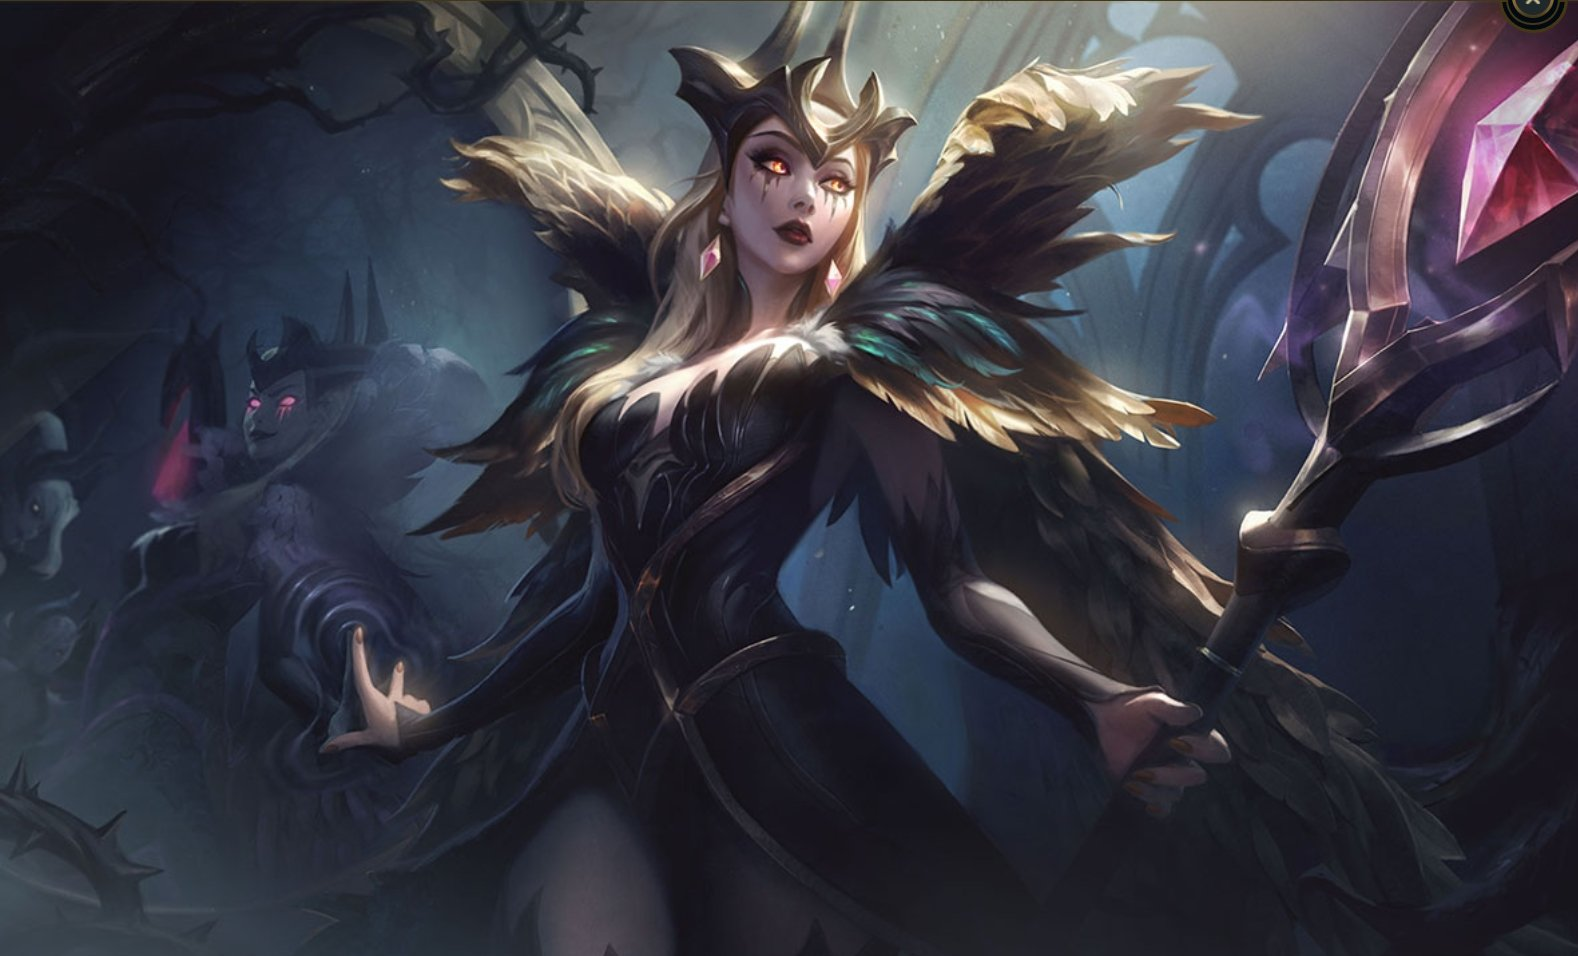 New Coven skins for Morgana, Zyra, and LeBlanc hit League PBE soon